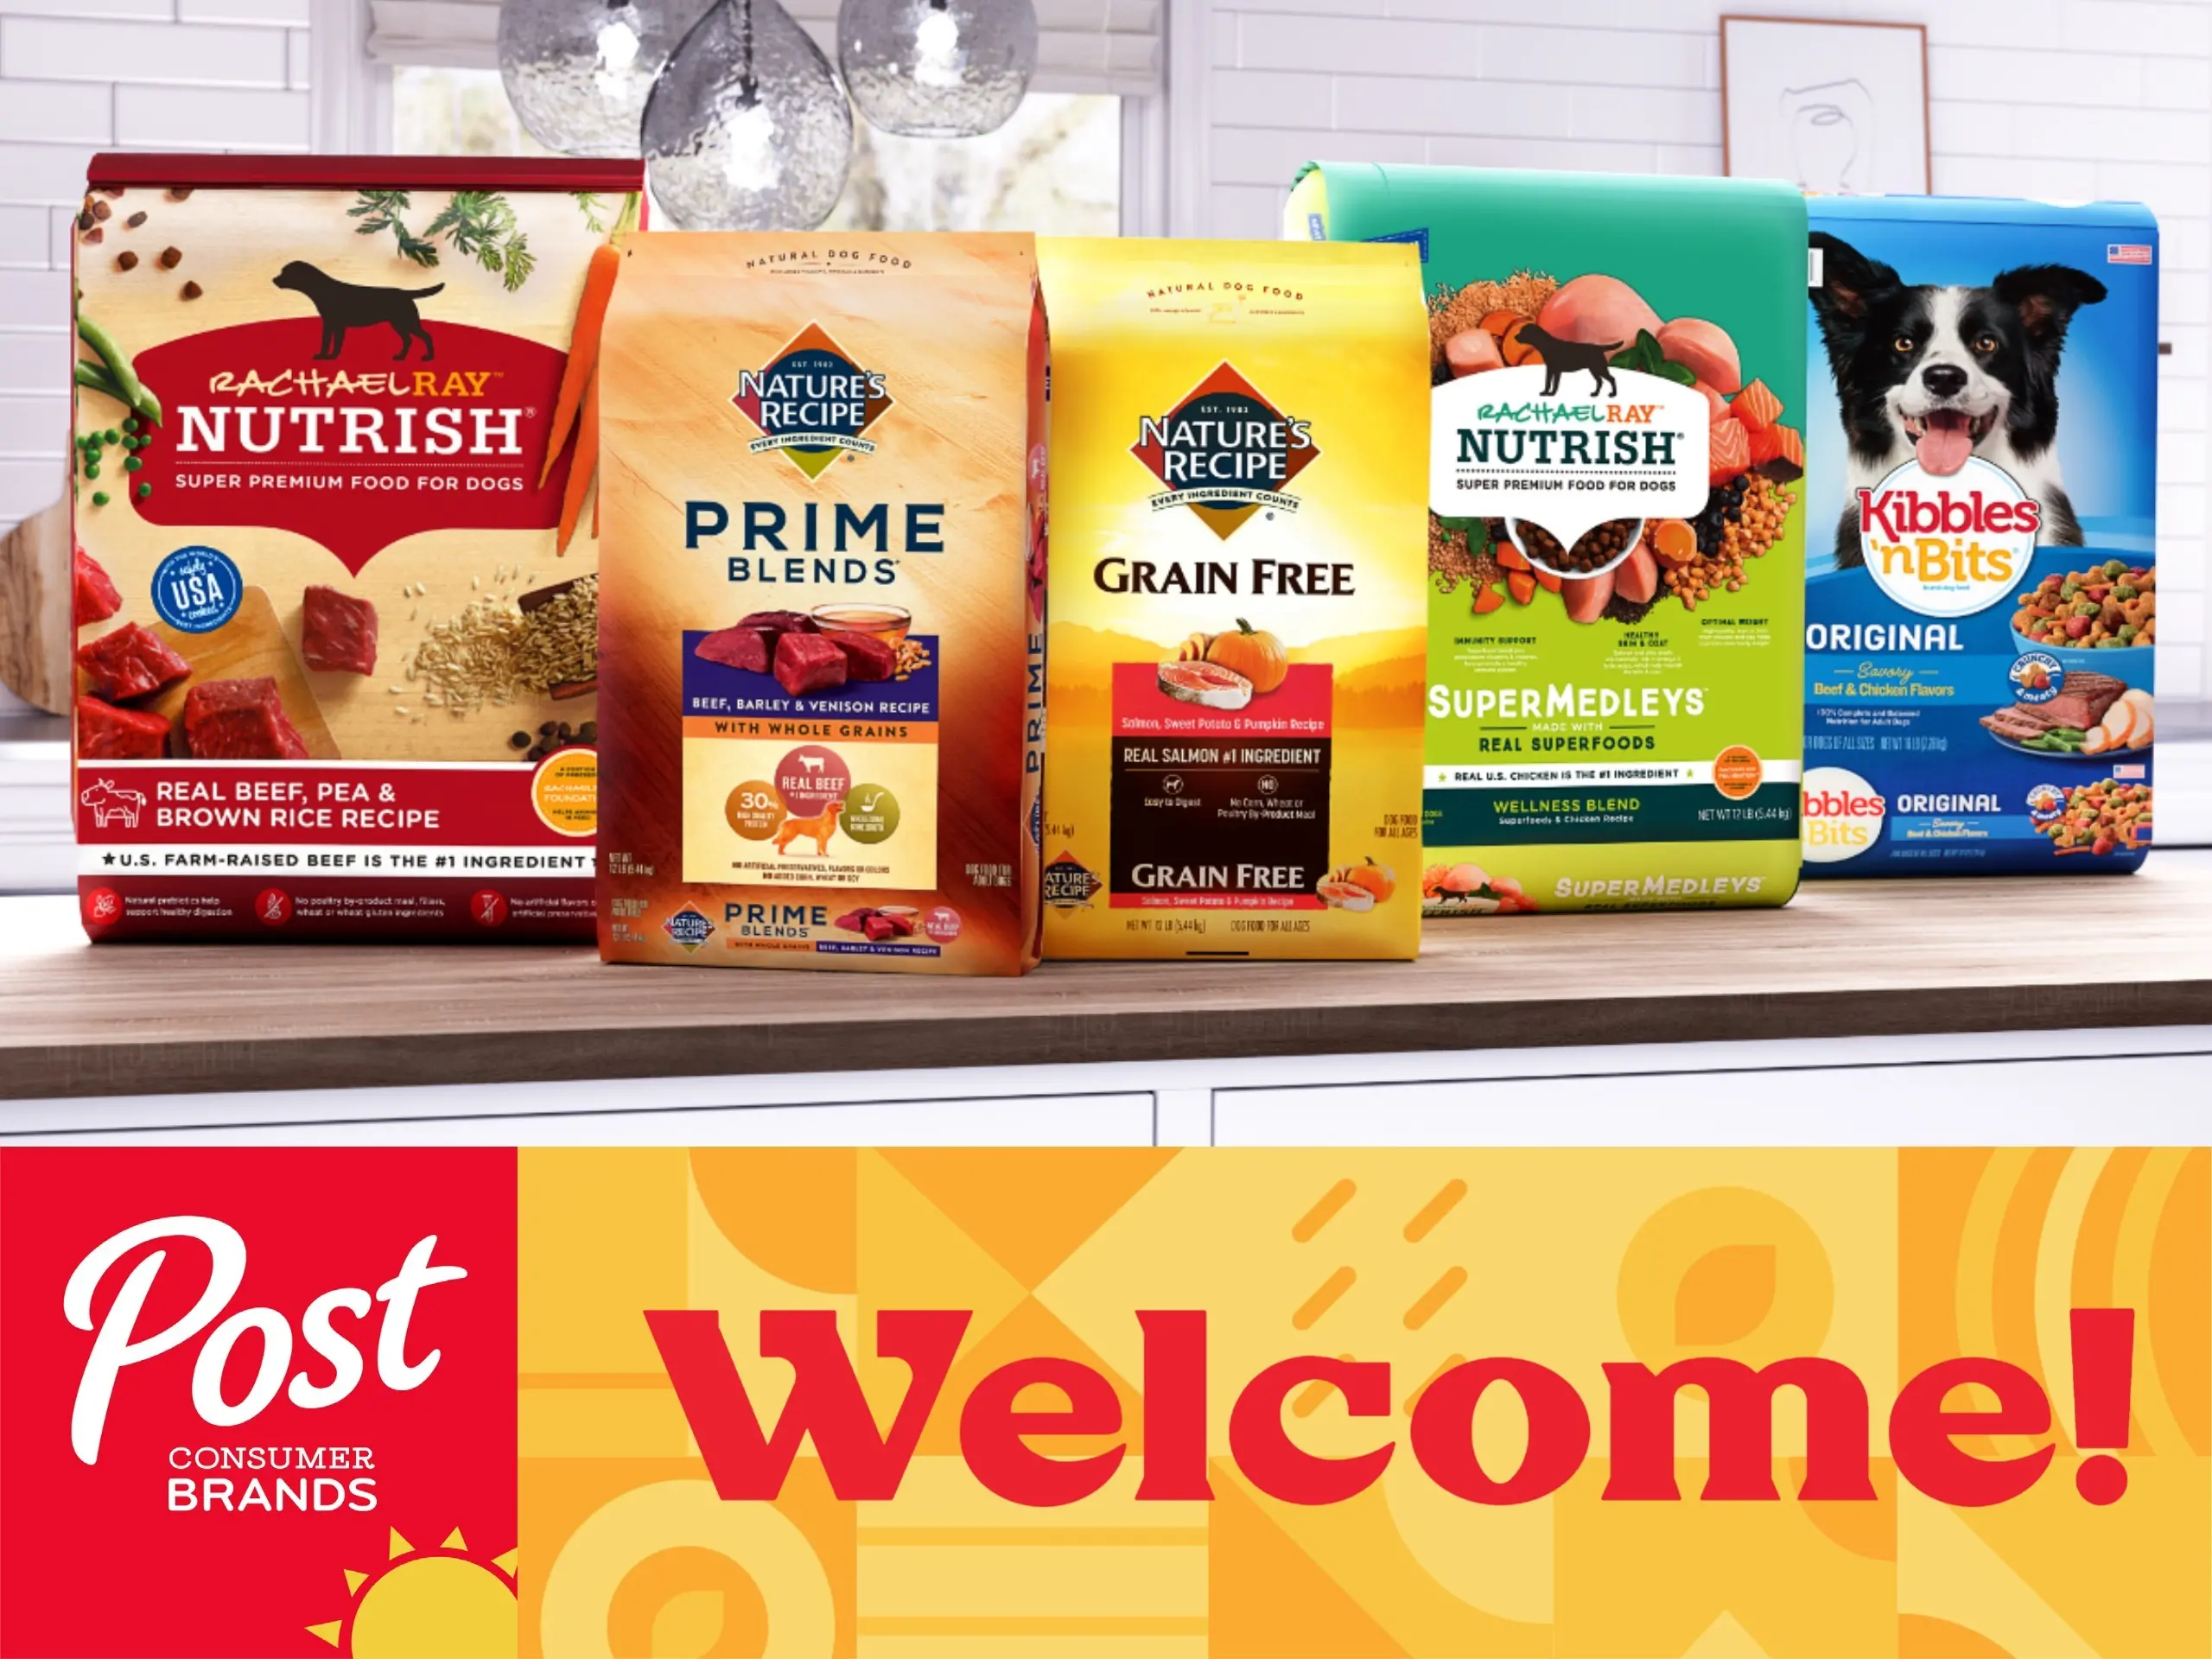 Pet food brands sit on a counter above a banner that says "Welcome!"